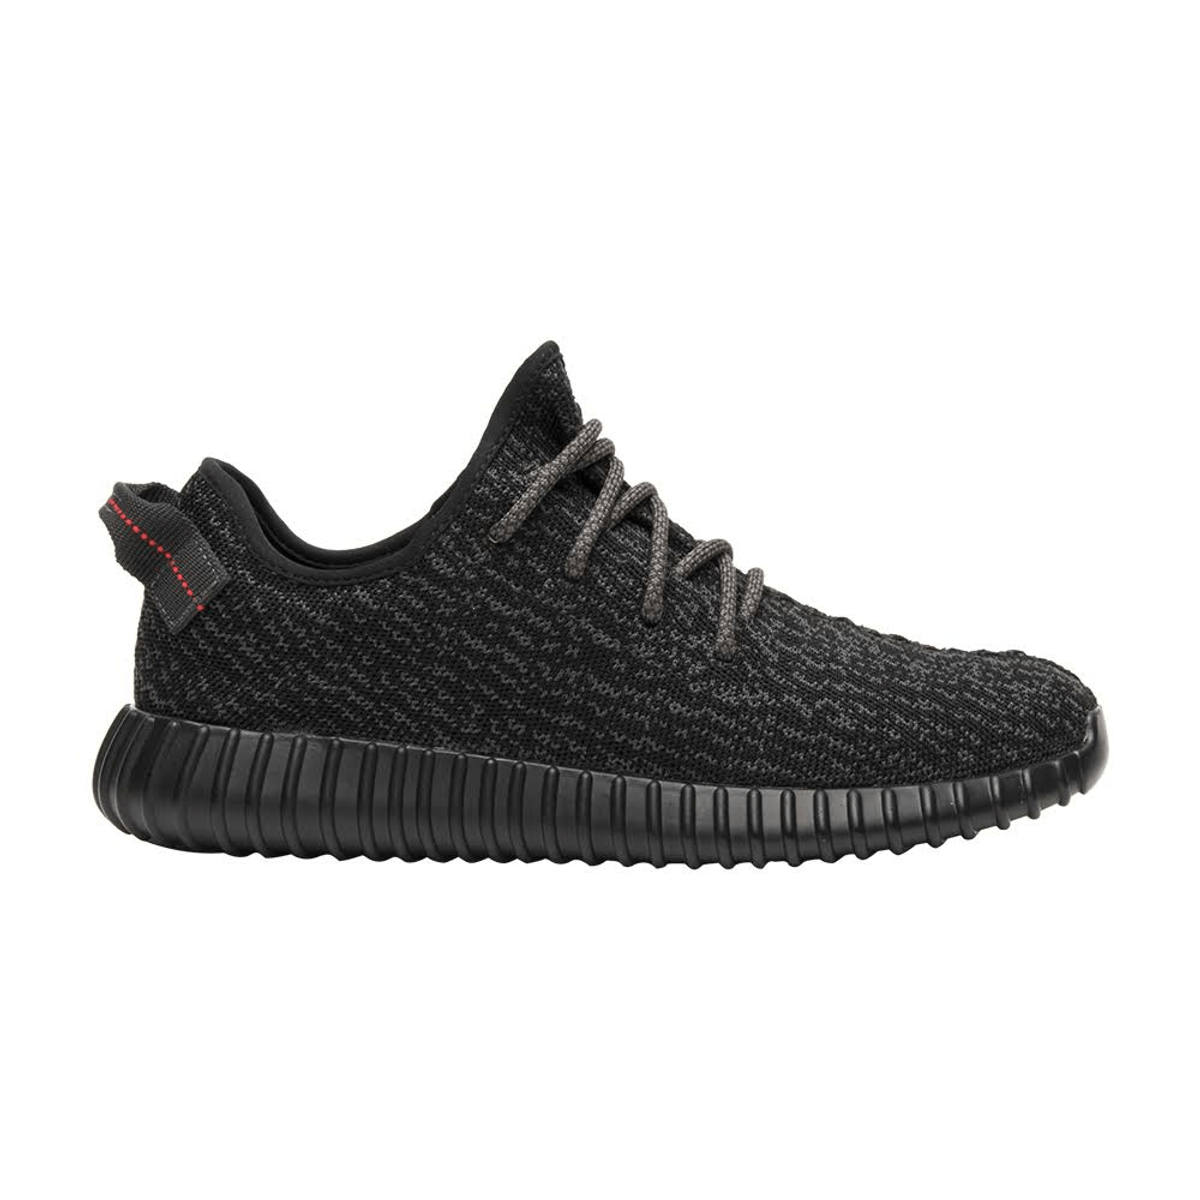 Closer Look at the 2023 Yeezy 350 Pirate Black - TheSiteSupply